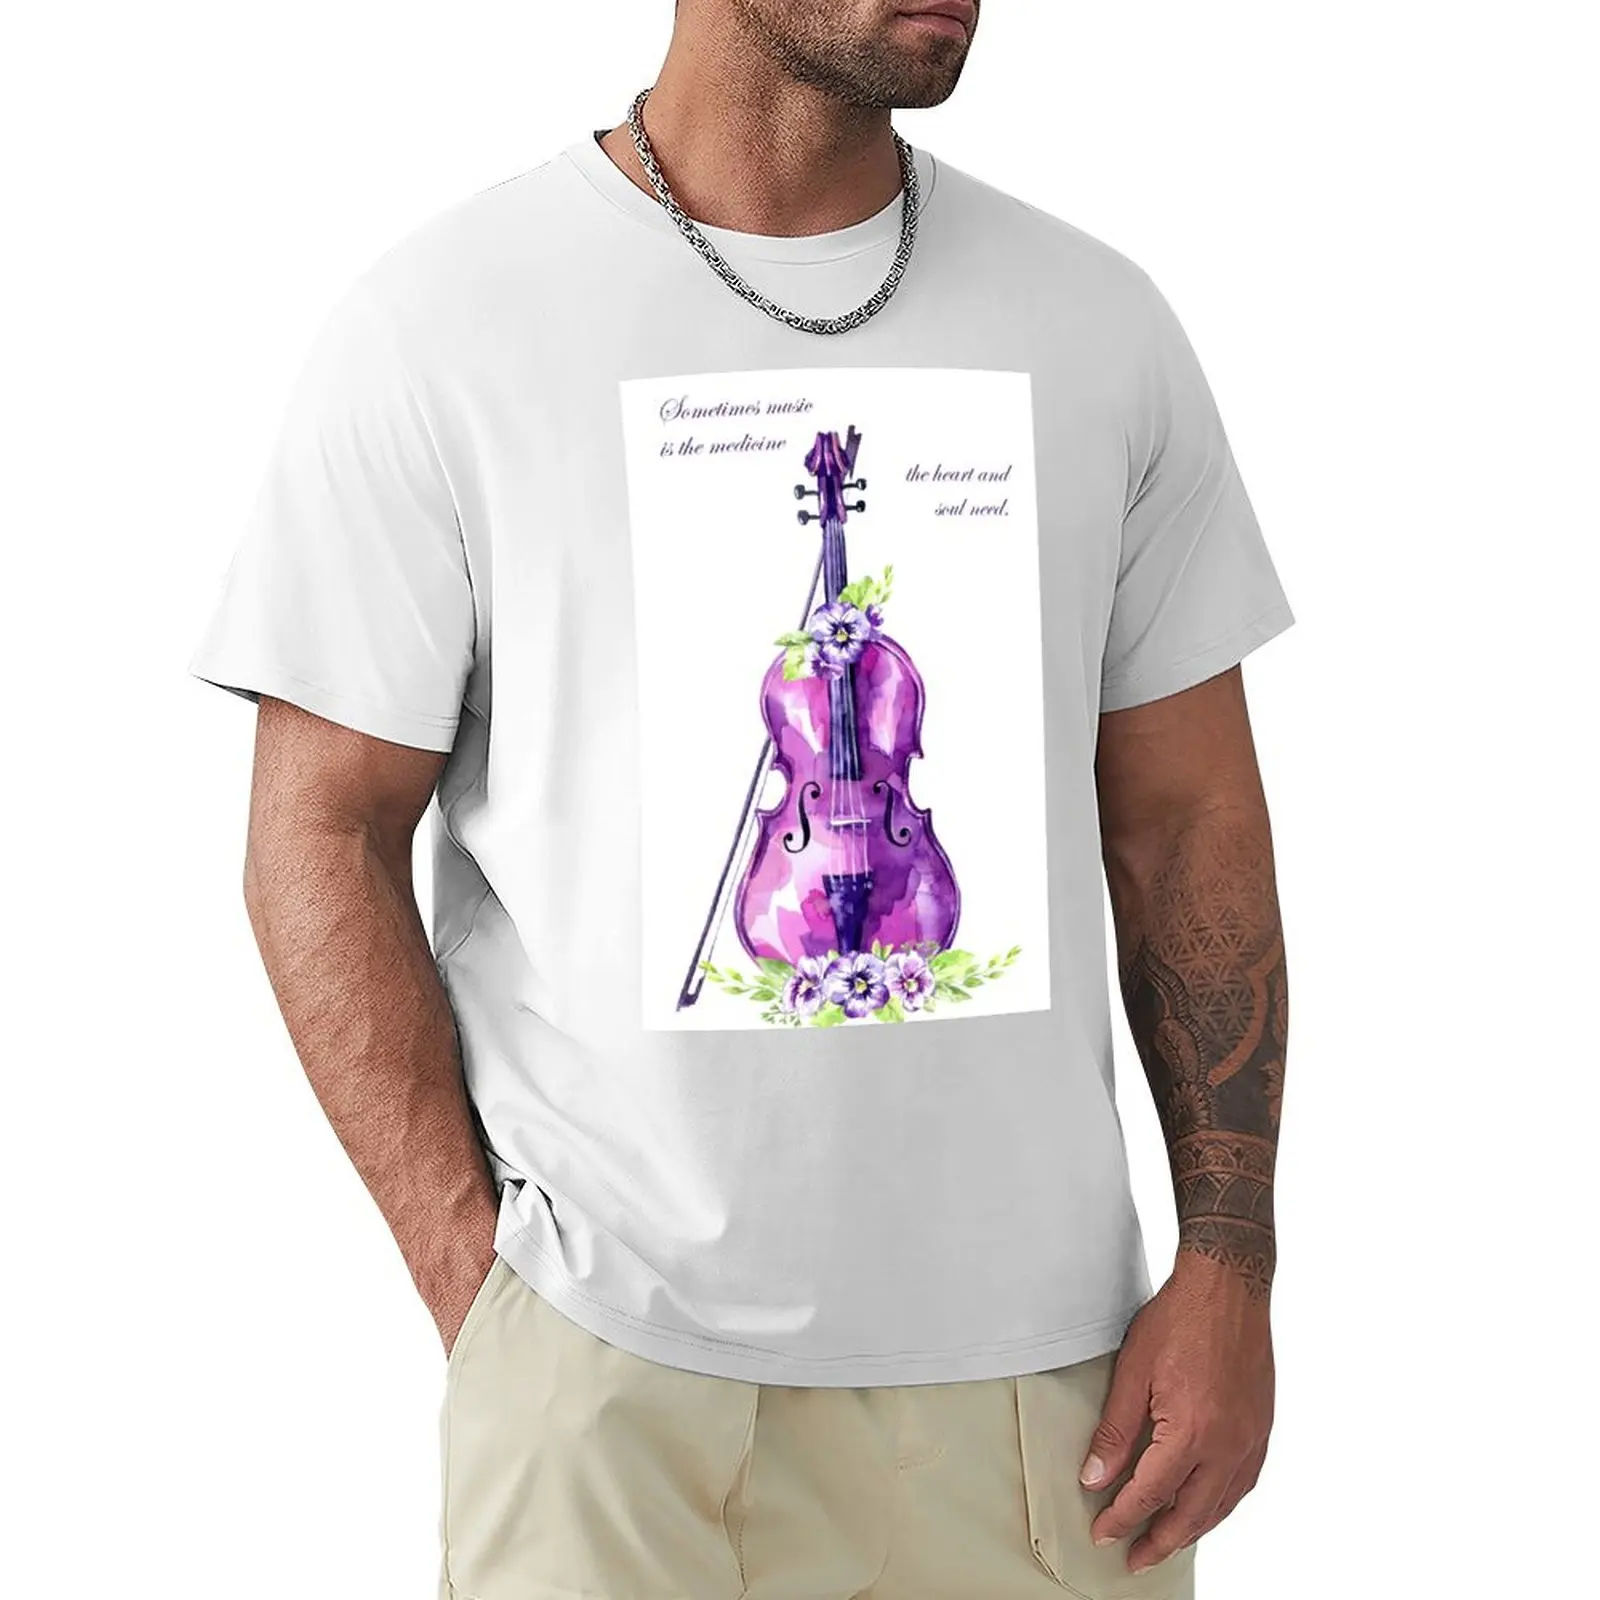 

Sometimes music is the medicine T-shirt summer clothes heavyweights animal prinfor boys big and tall t shirts for men